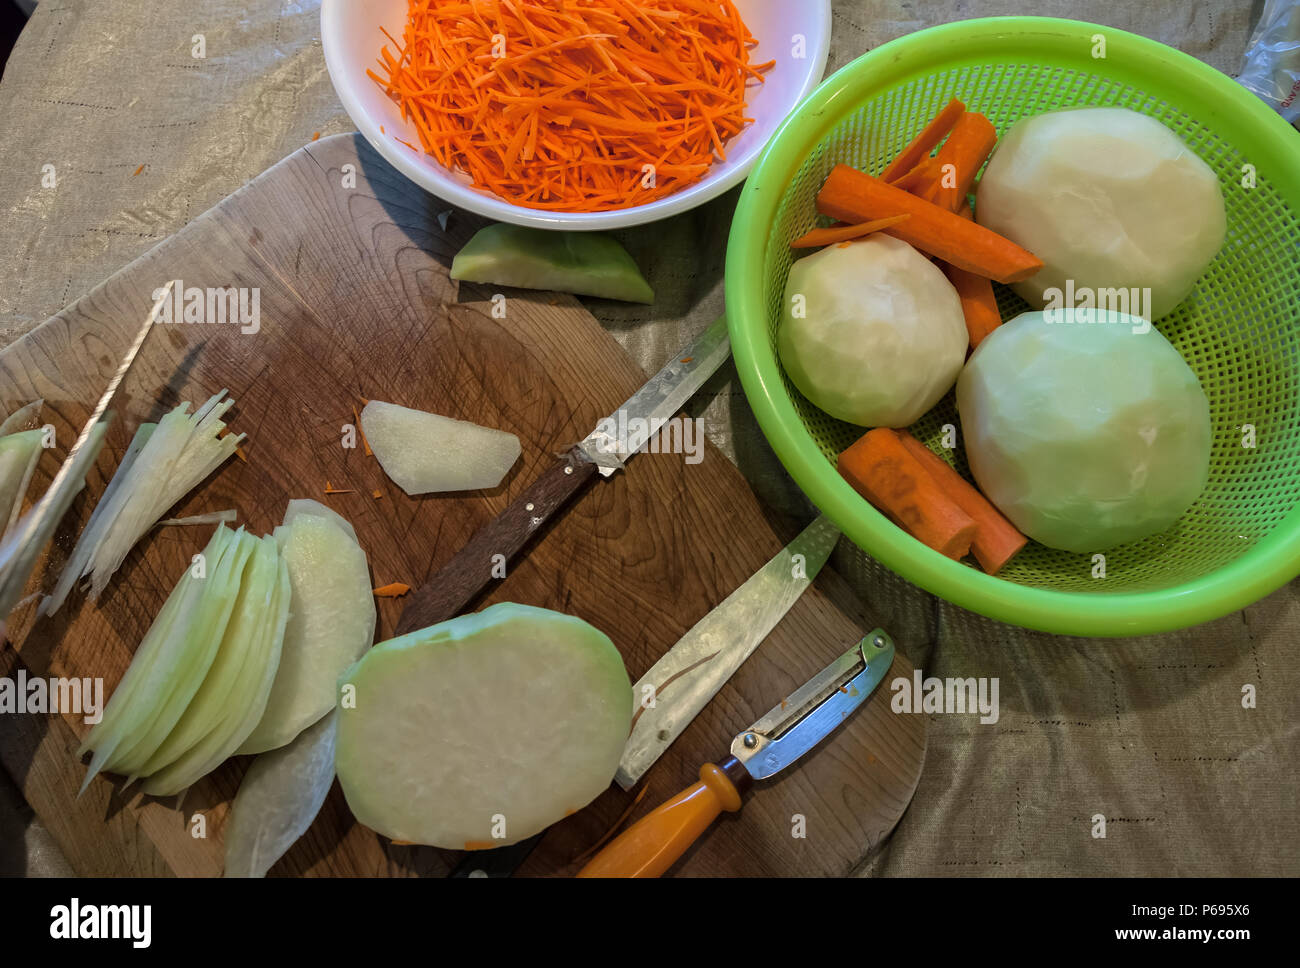 Wild cabbage, kohlrabi, and carrots in Julienne cuts for Asian salad Stock Photo